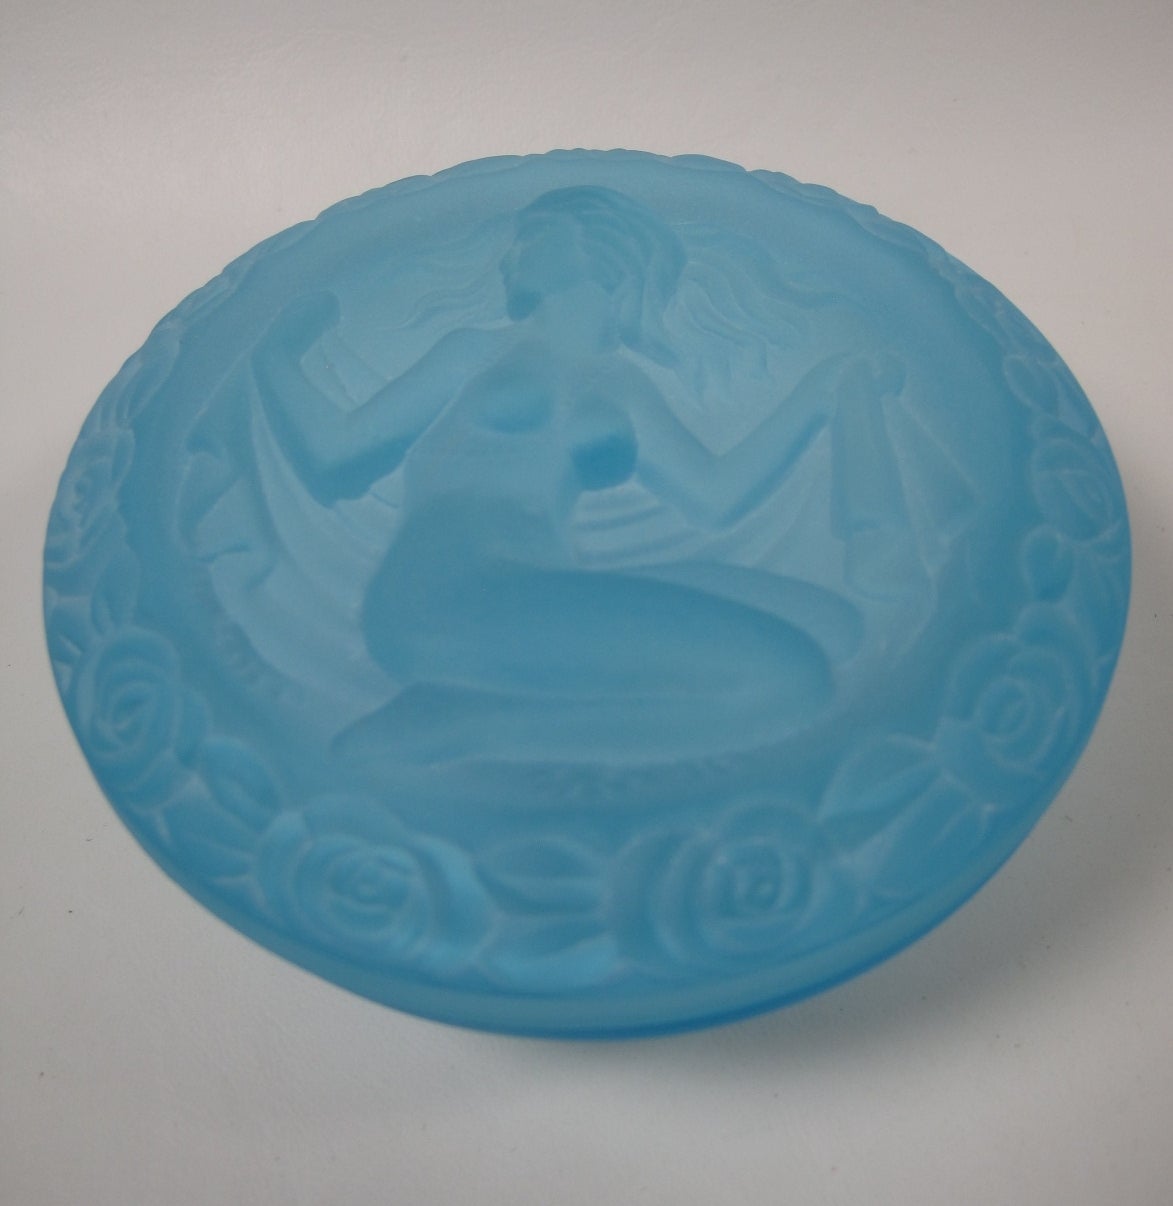 Nude Art Deco Czech Art Glass Powder or Jewelry Box
Precious Bohemian box made from aqua blue pressed glass.

Free shipping within the United States and Canada.